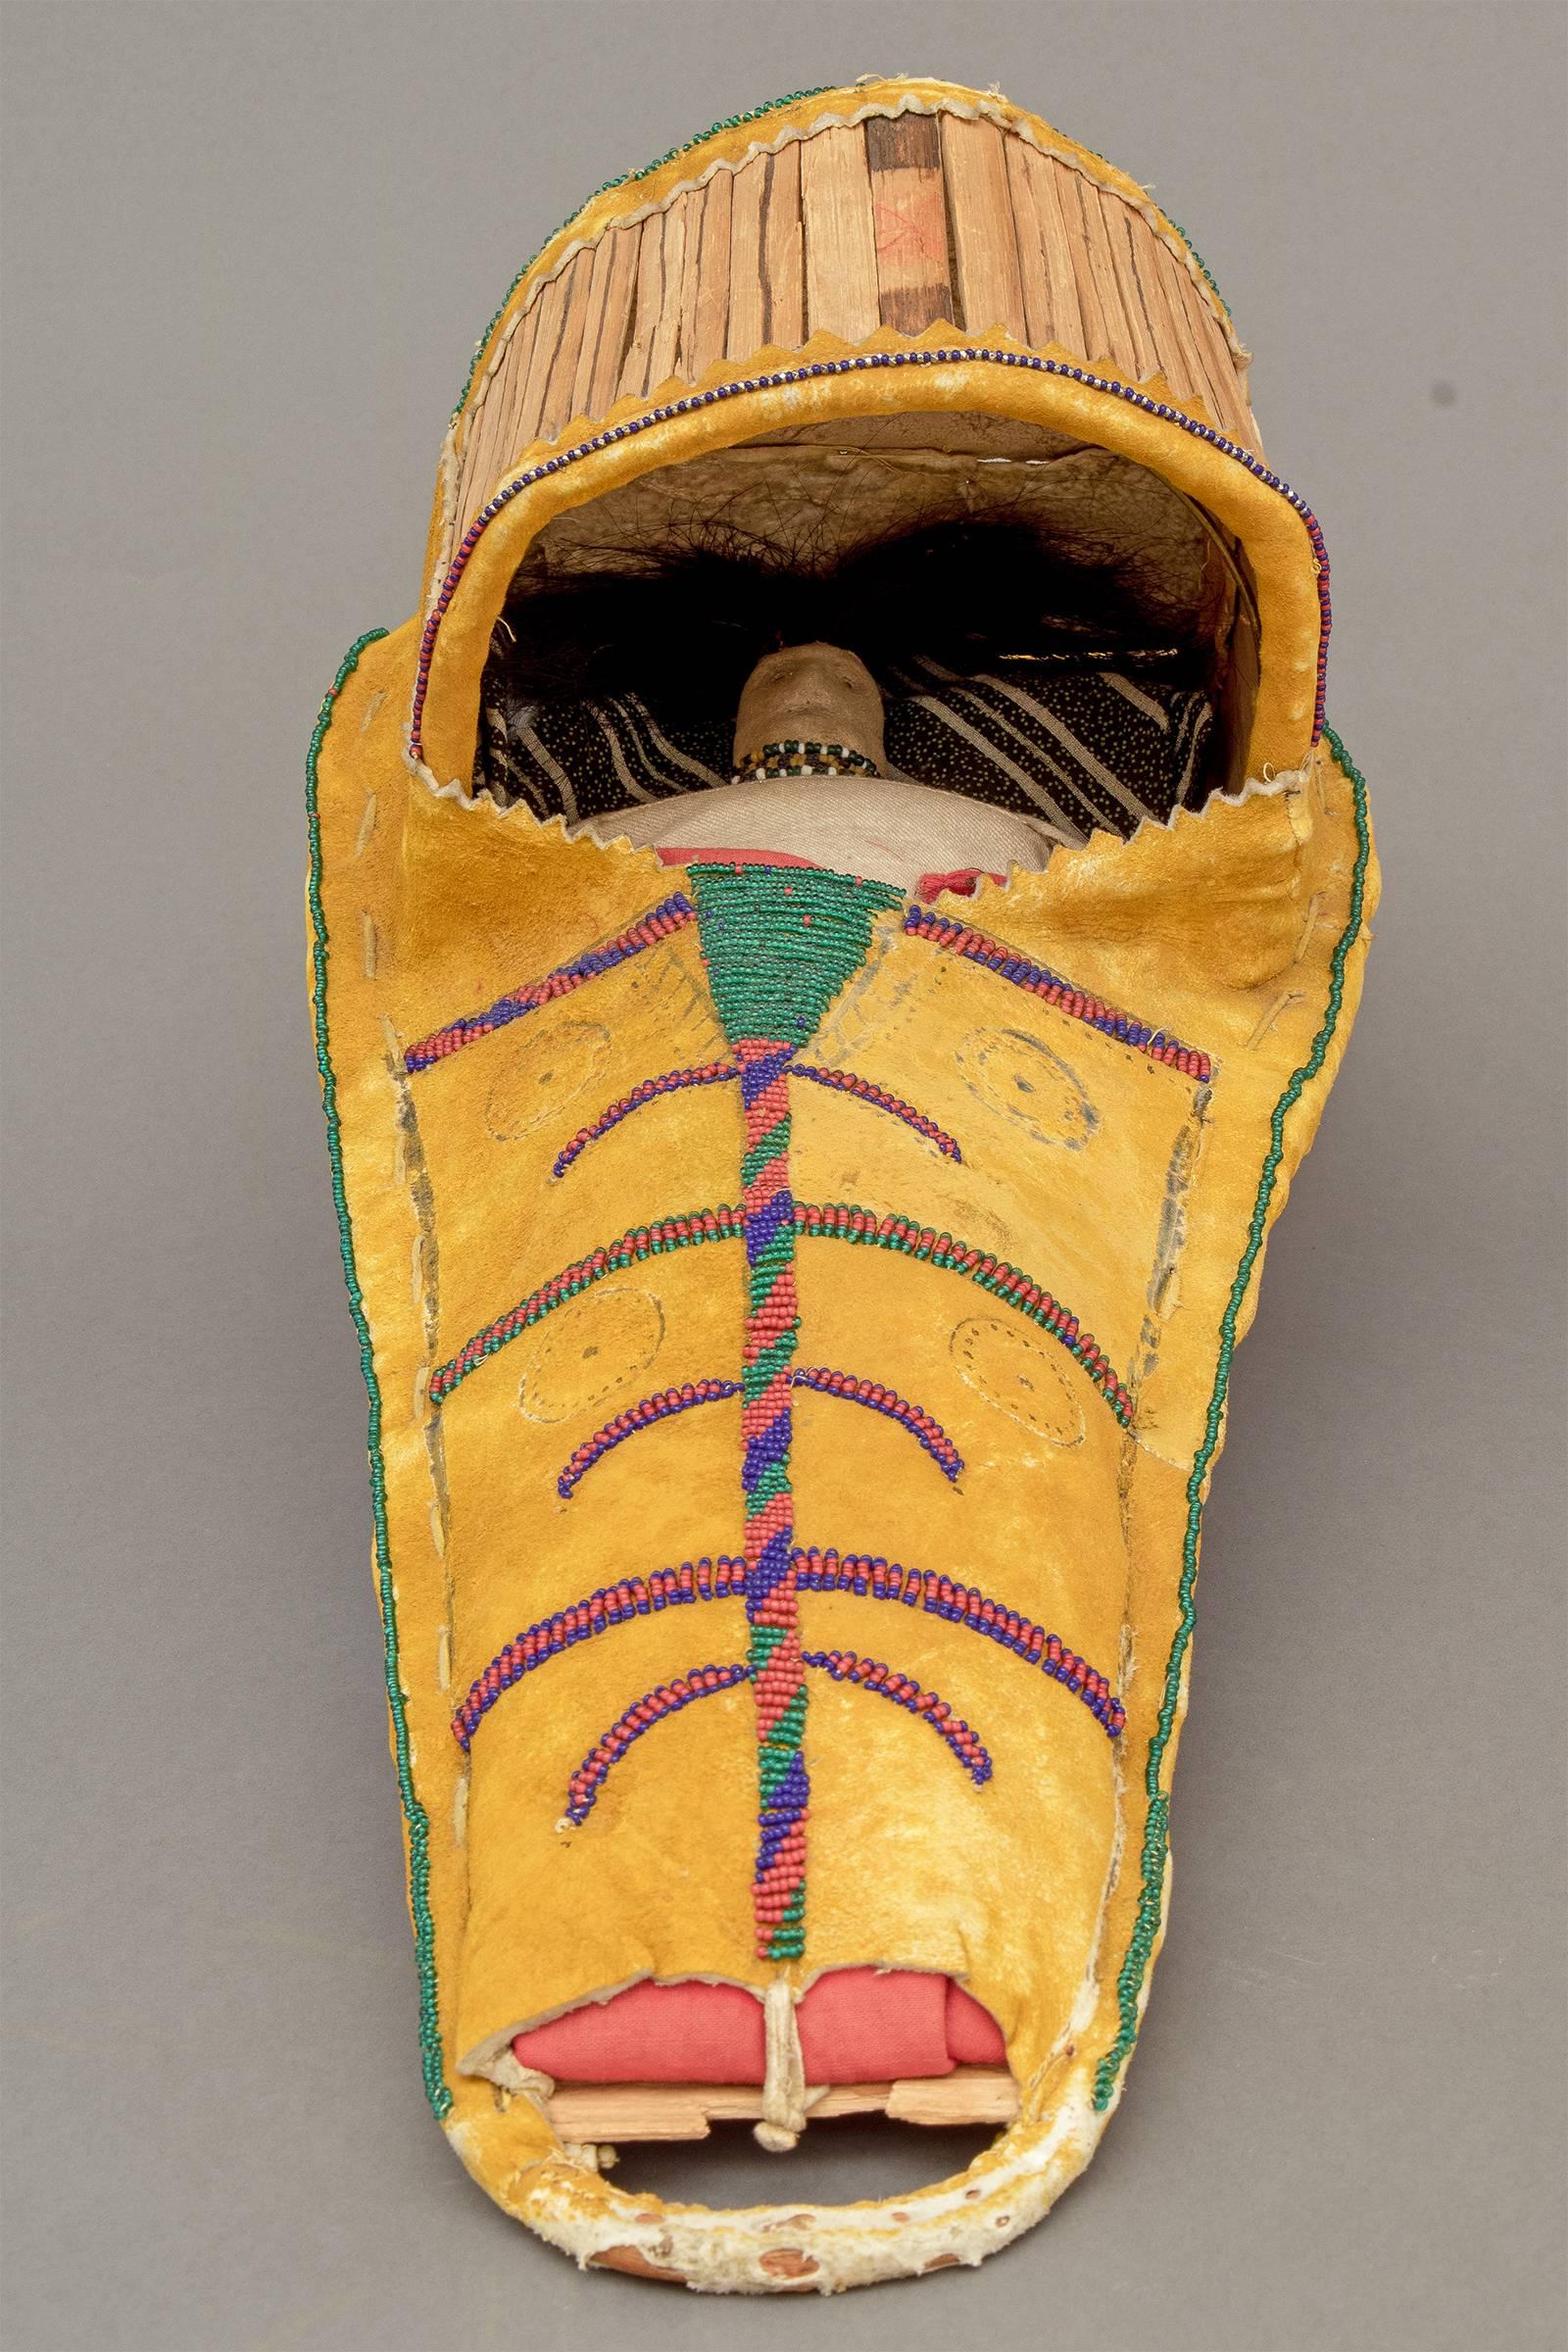 American Indian girl's toy cradleboard with a doll laced inside. Constructed of native tanned hide stretched over a wooden frame and decorated with yellow ochre pigment and glass trade beads.

A nomadic tribe, the Apache peoples eventually settled